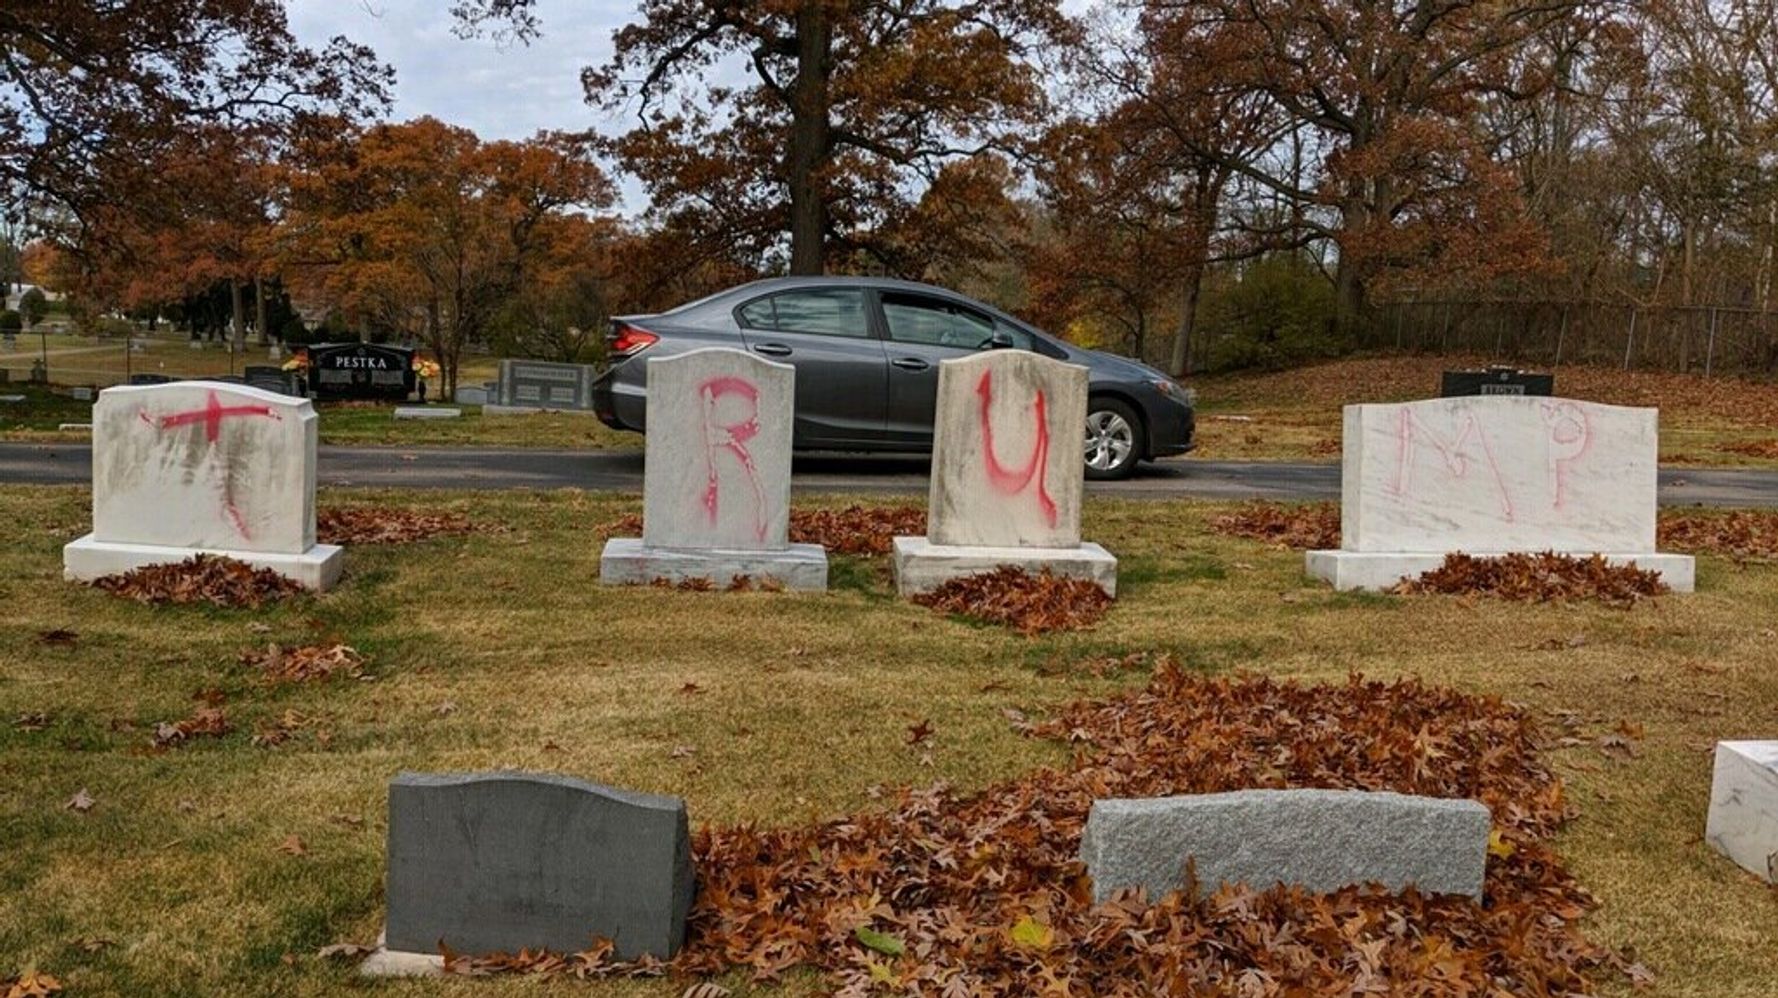 Michigan Jewish Cemetery Vandalized With MAGA Messages Ahead Of Trump Rally